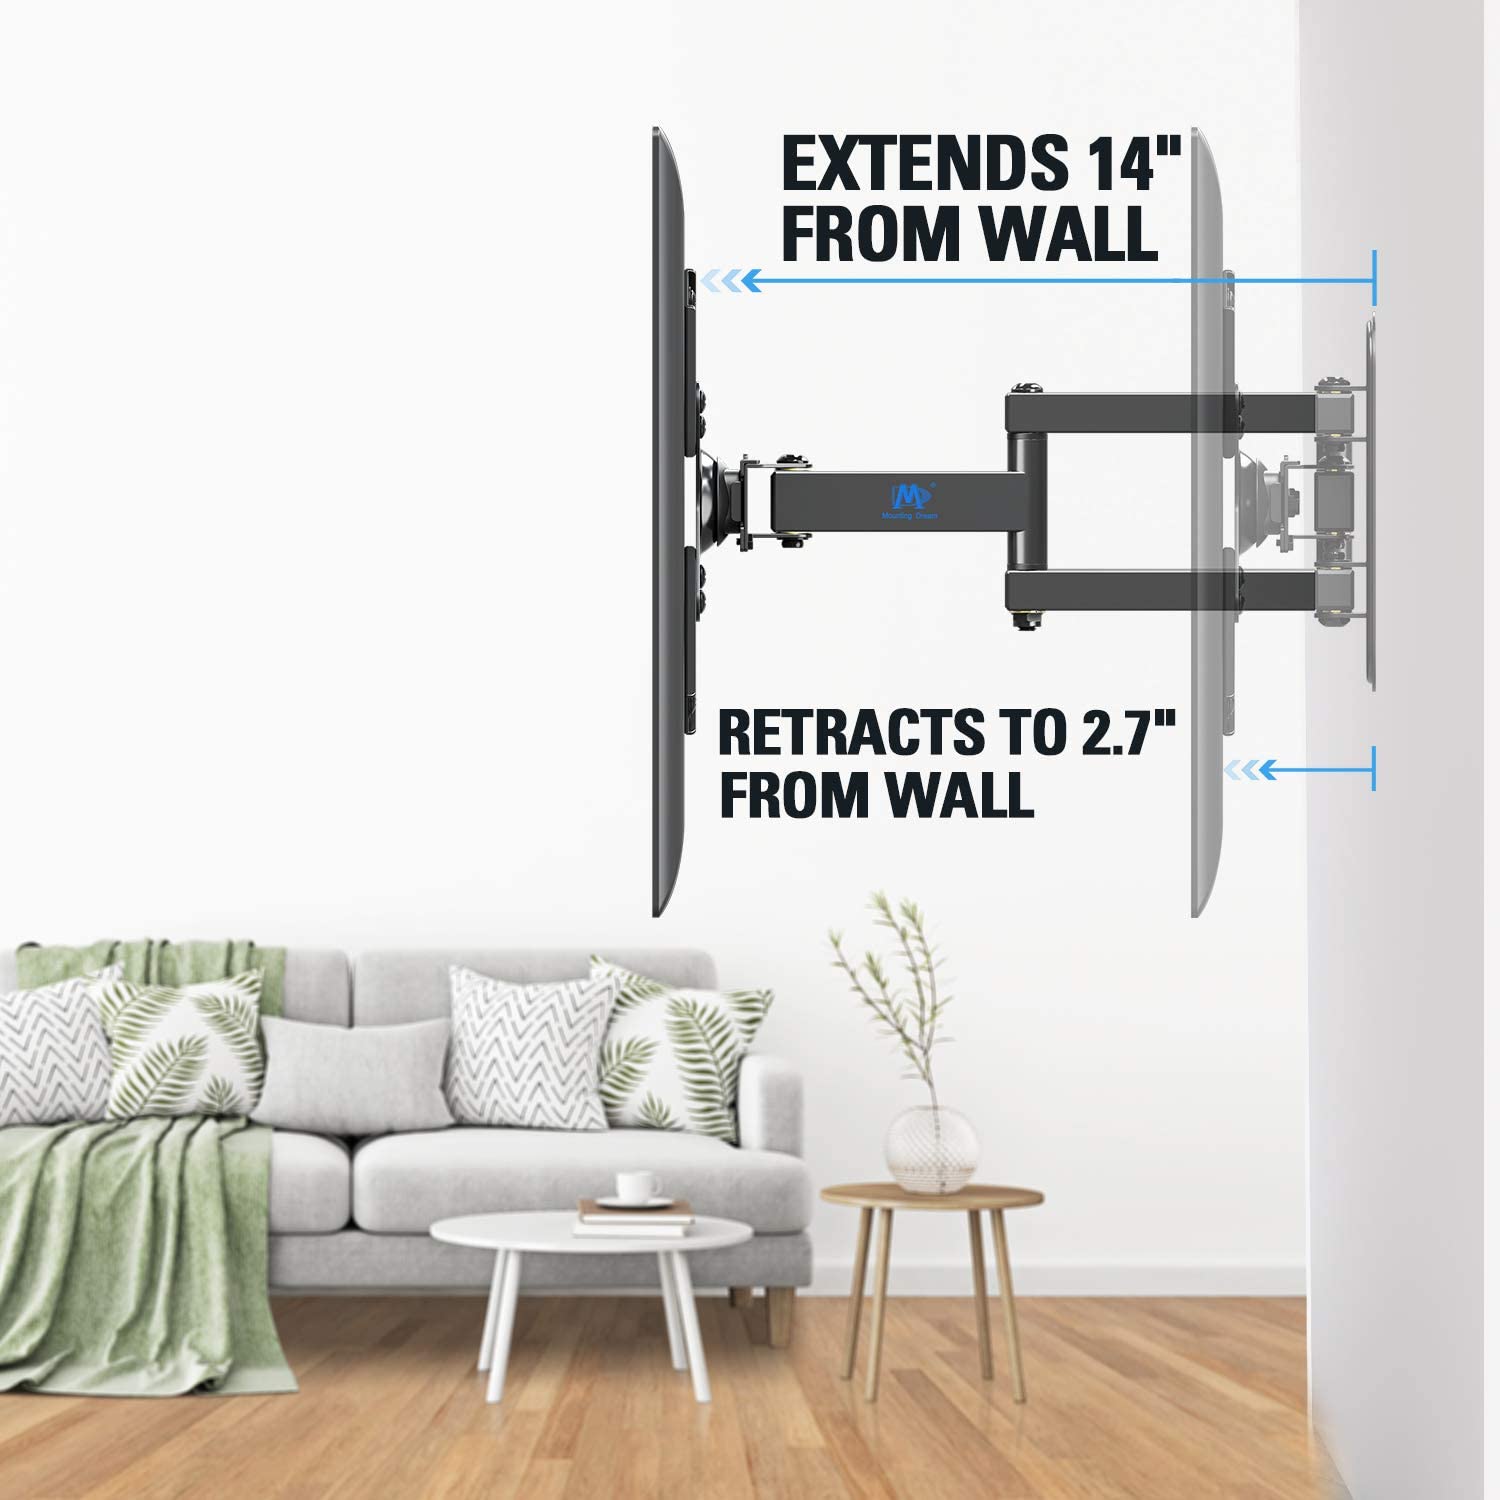 extends 14'' from wall for max adjustment and retracts 2.7'' to wall for saving space